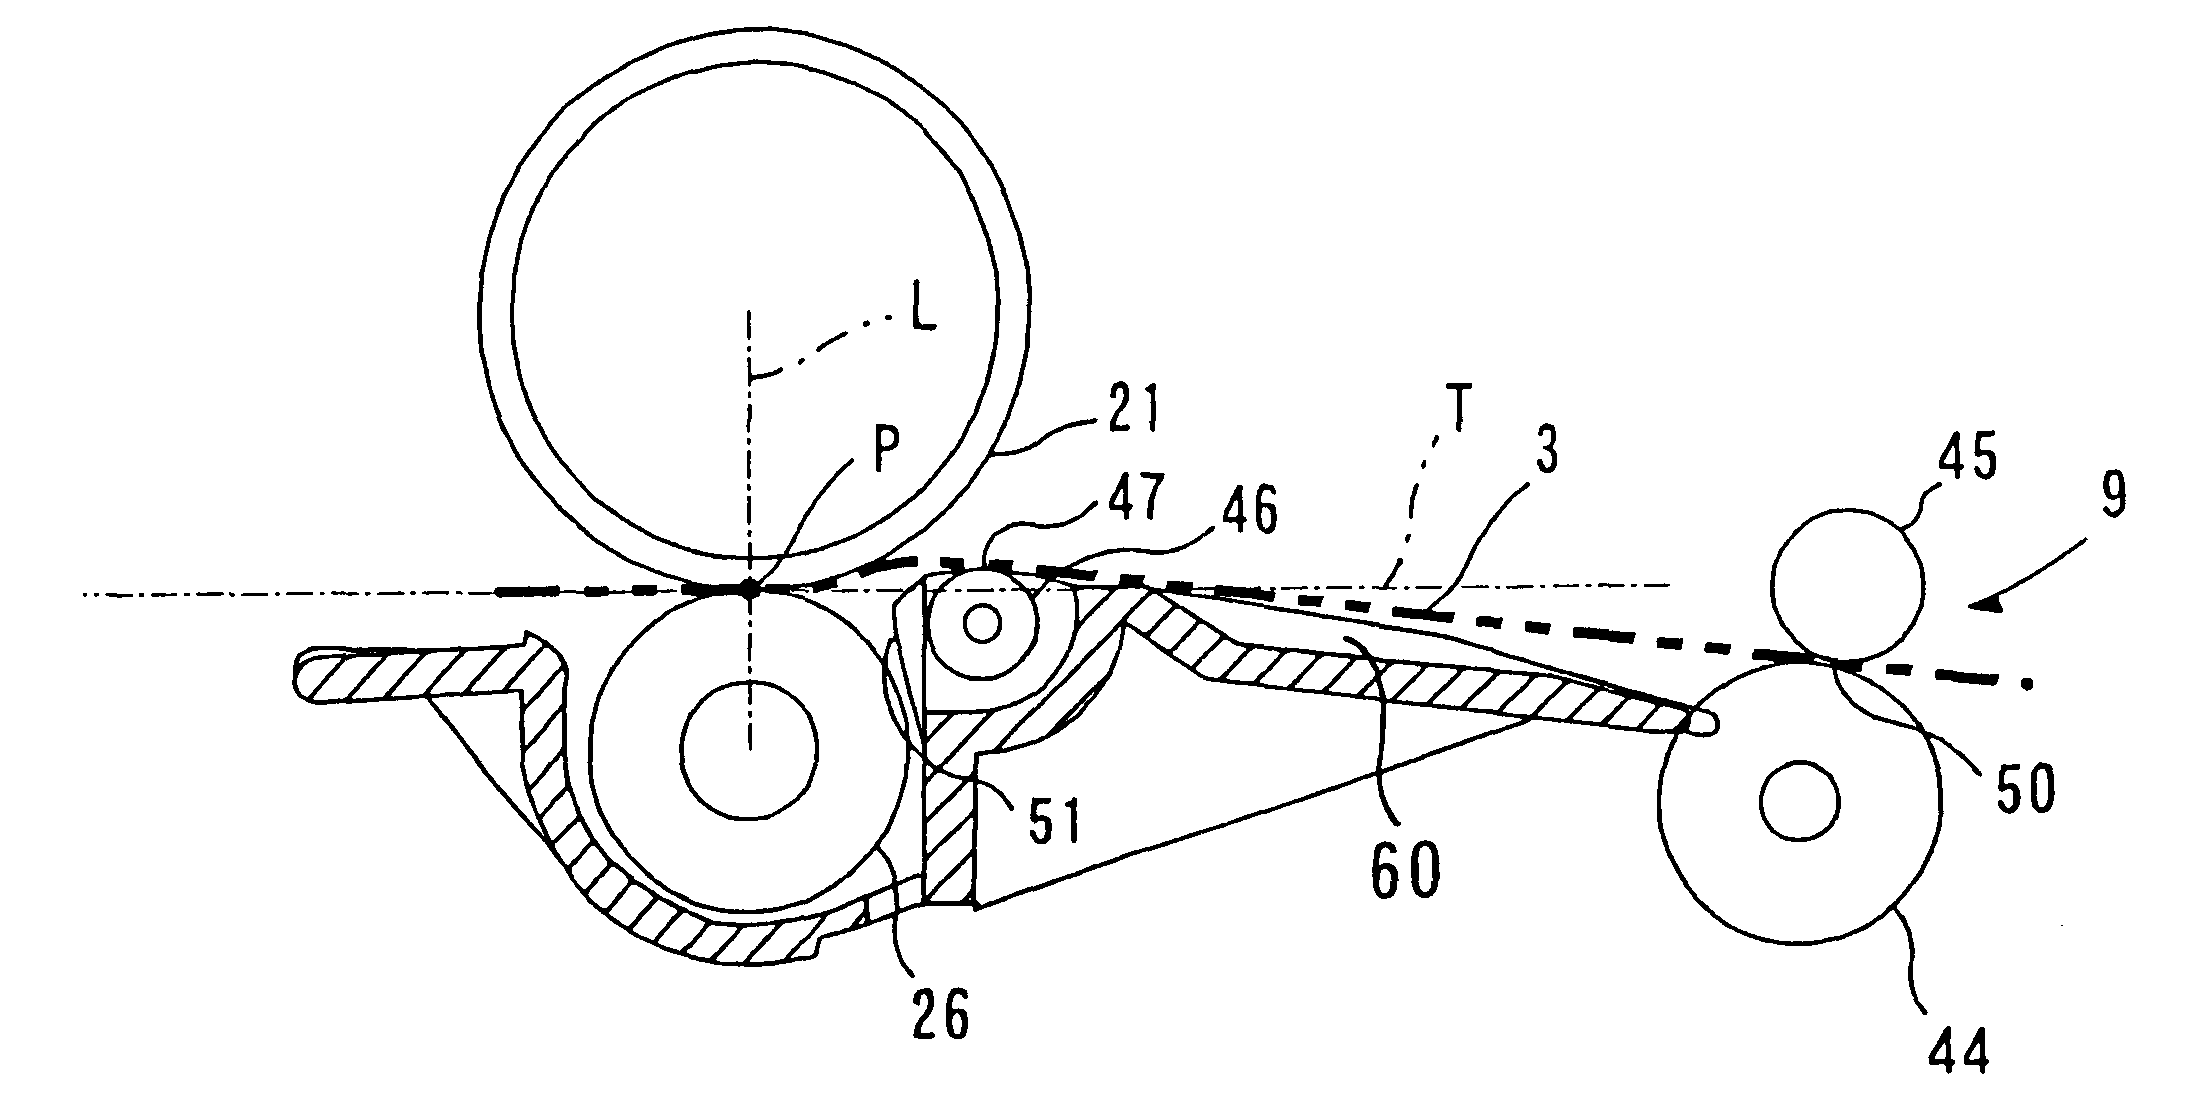 Recording medium feed path for an image forming apparatus